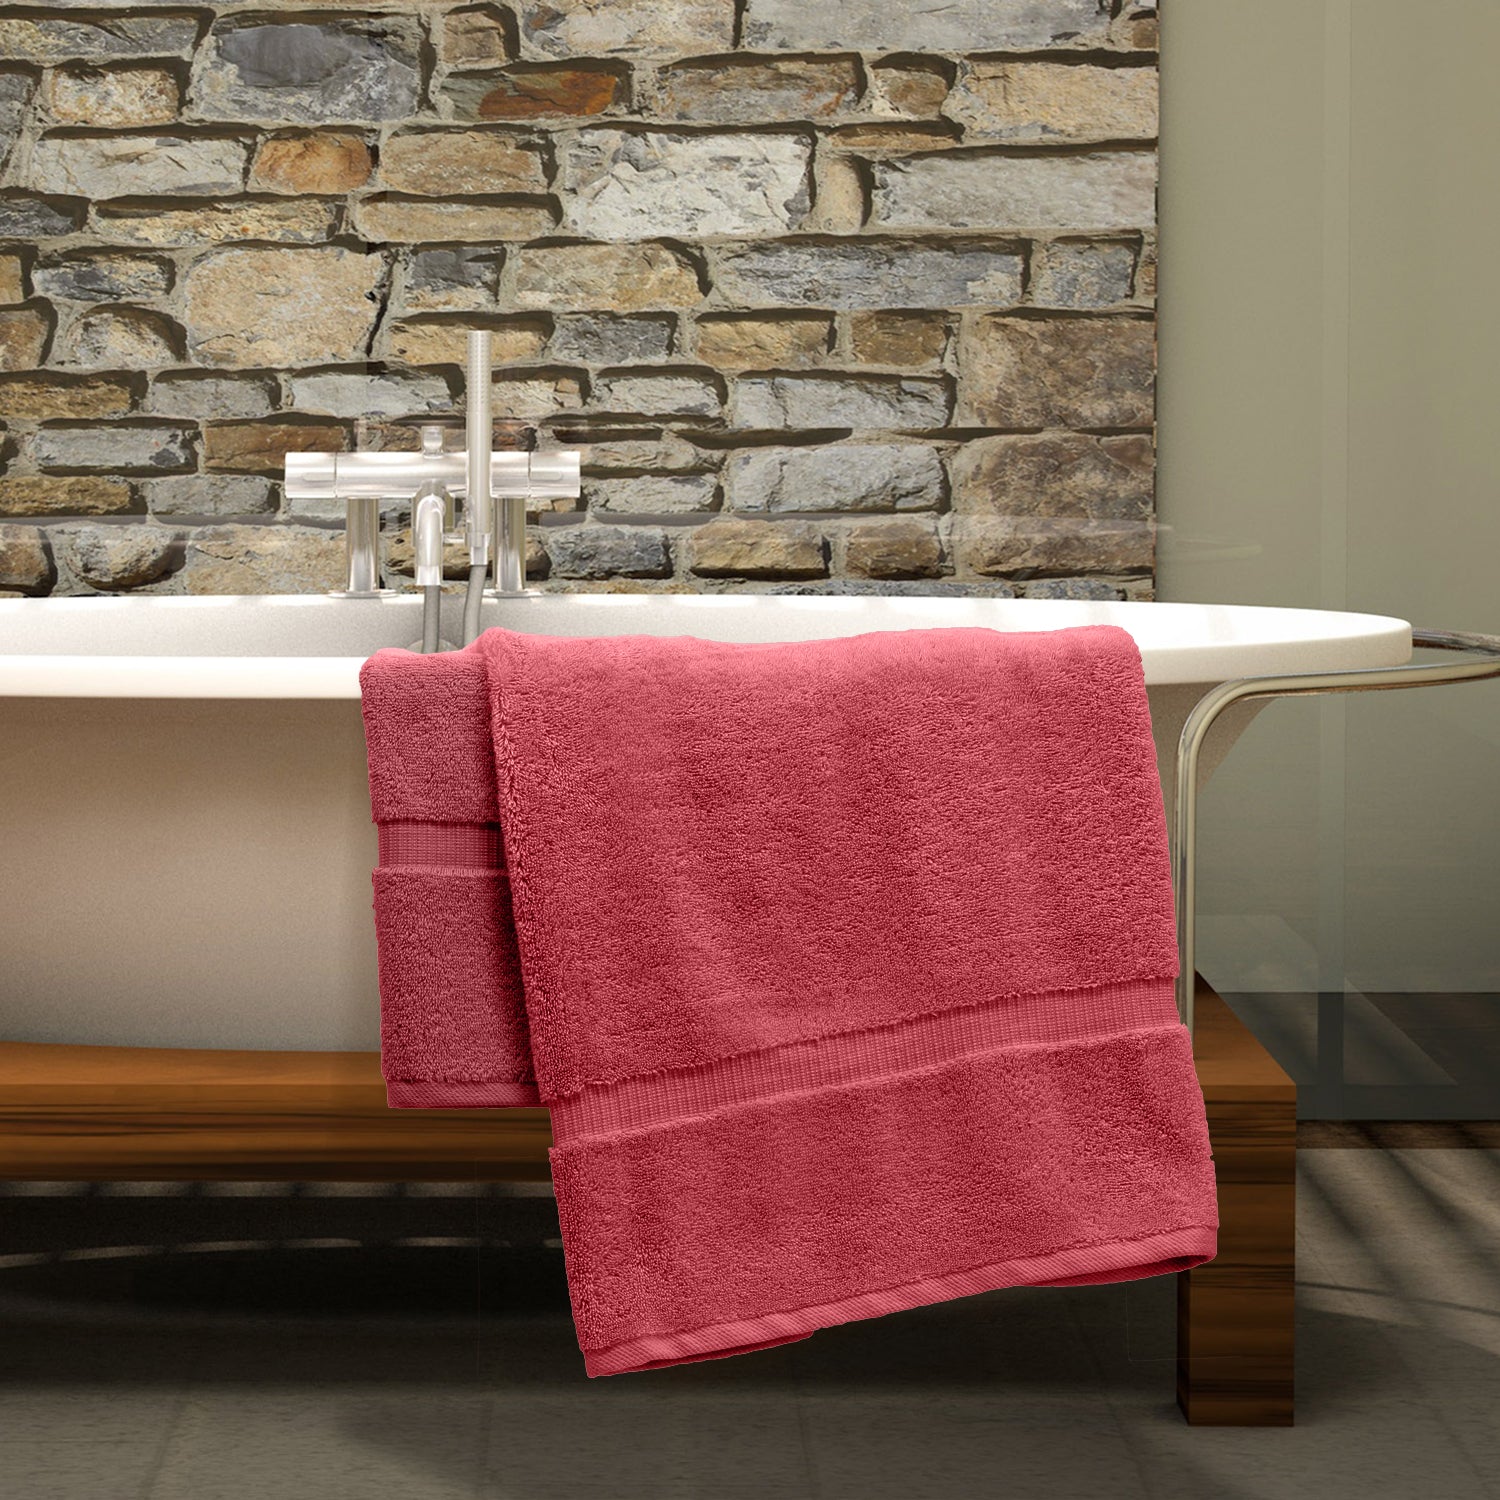 Authentic Hotel and Spa Turkish Cotton Bath Towels (Set of 4